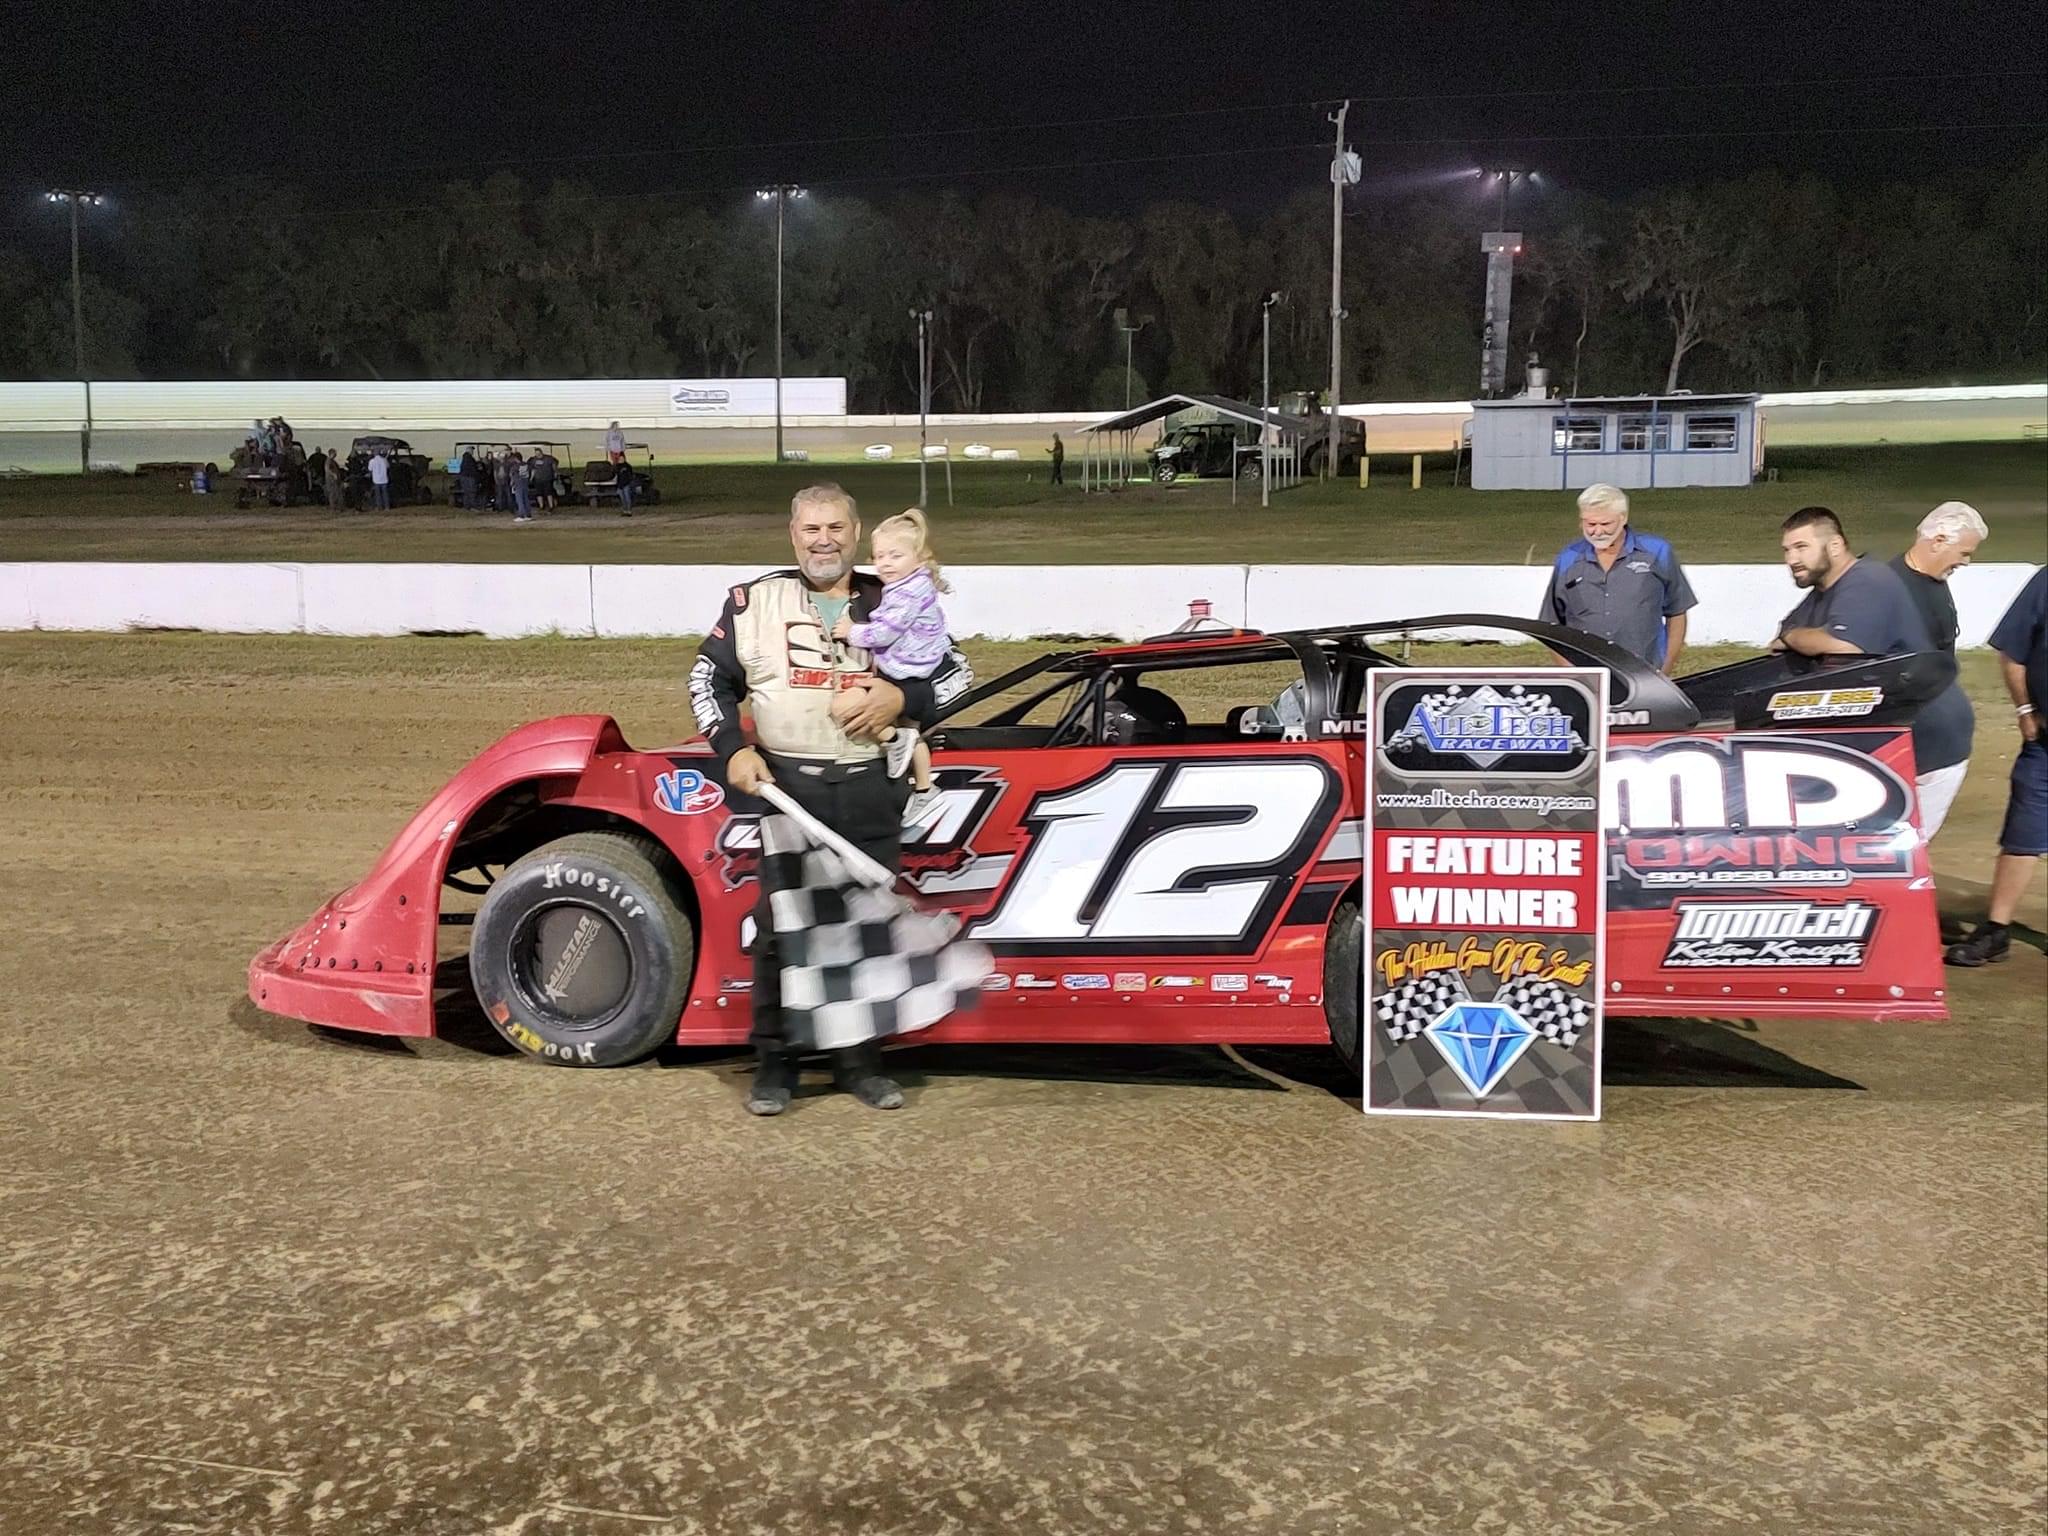 A very happy Johnny Collins in All Tech Raceway victory lane last night in 602 Late Models.